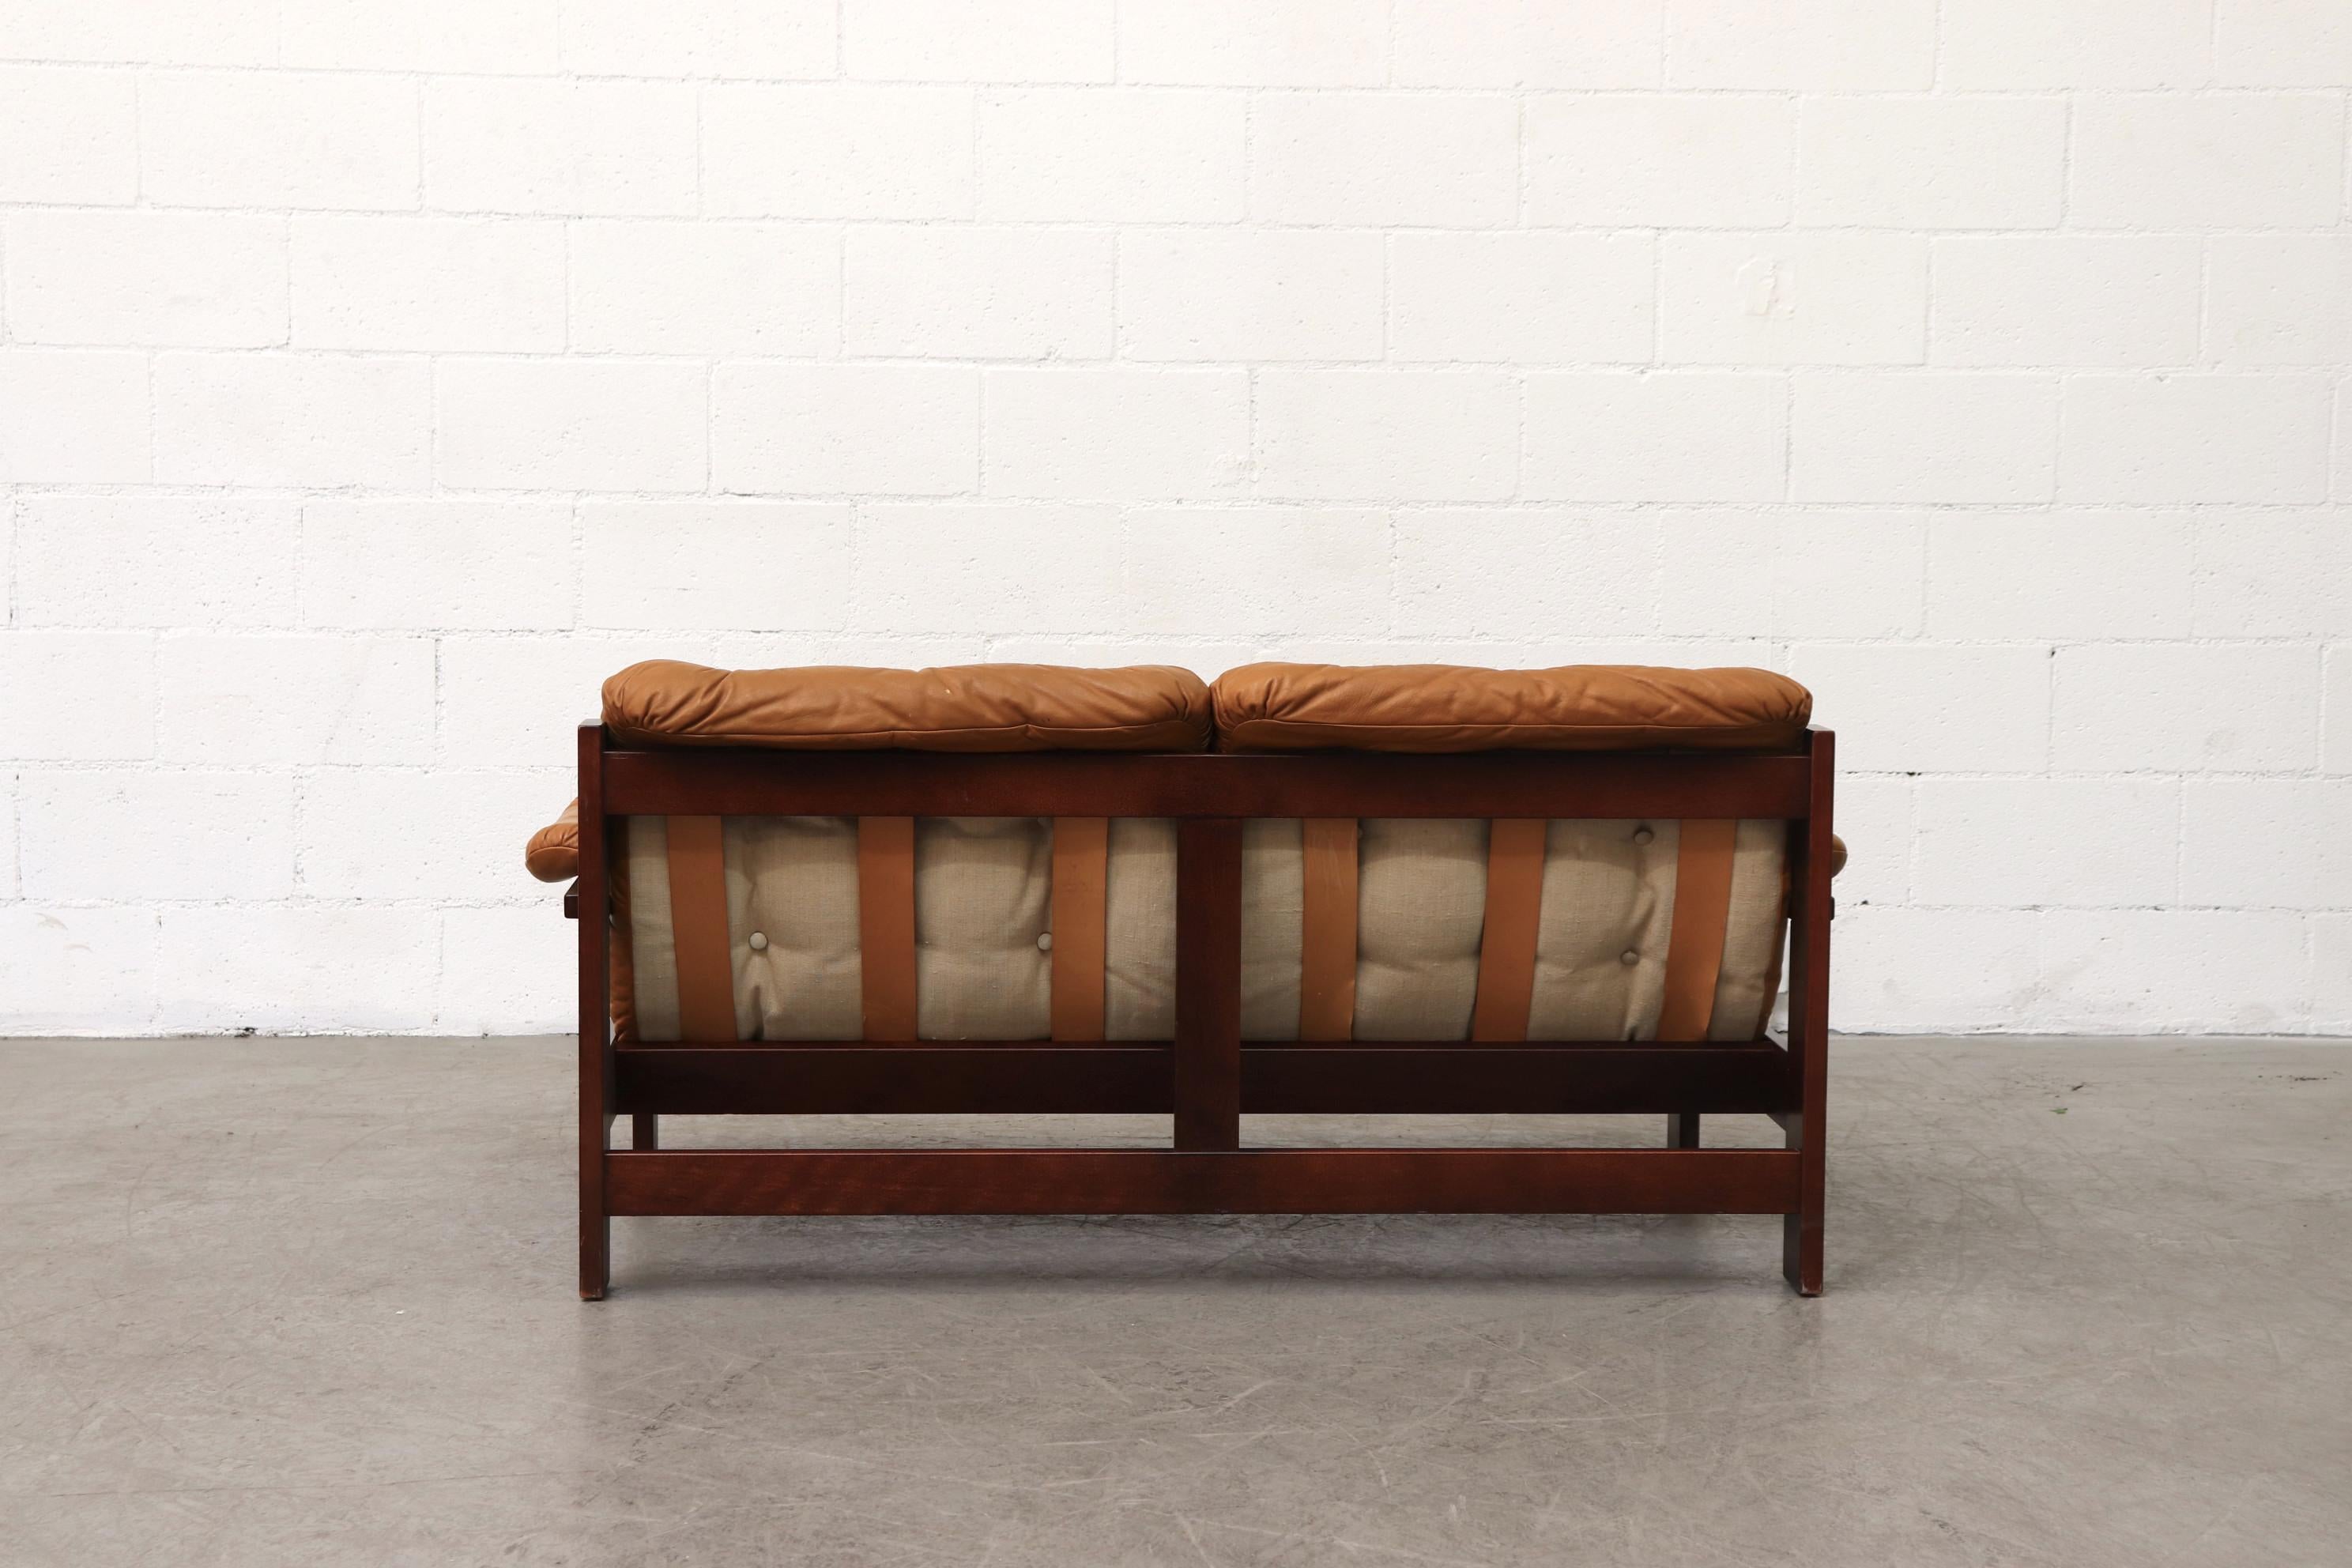 Mid-20th Century Arne Norell Inspired Butterscotch Tufted Leather Loveseat for Illums Bolighus